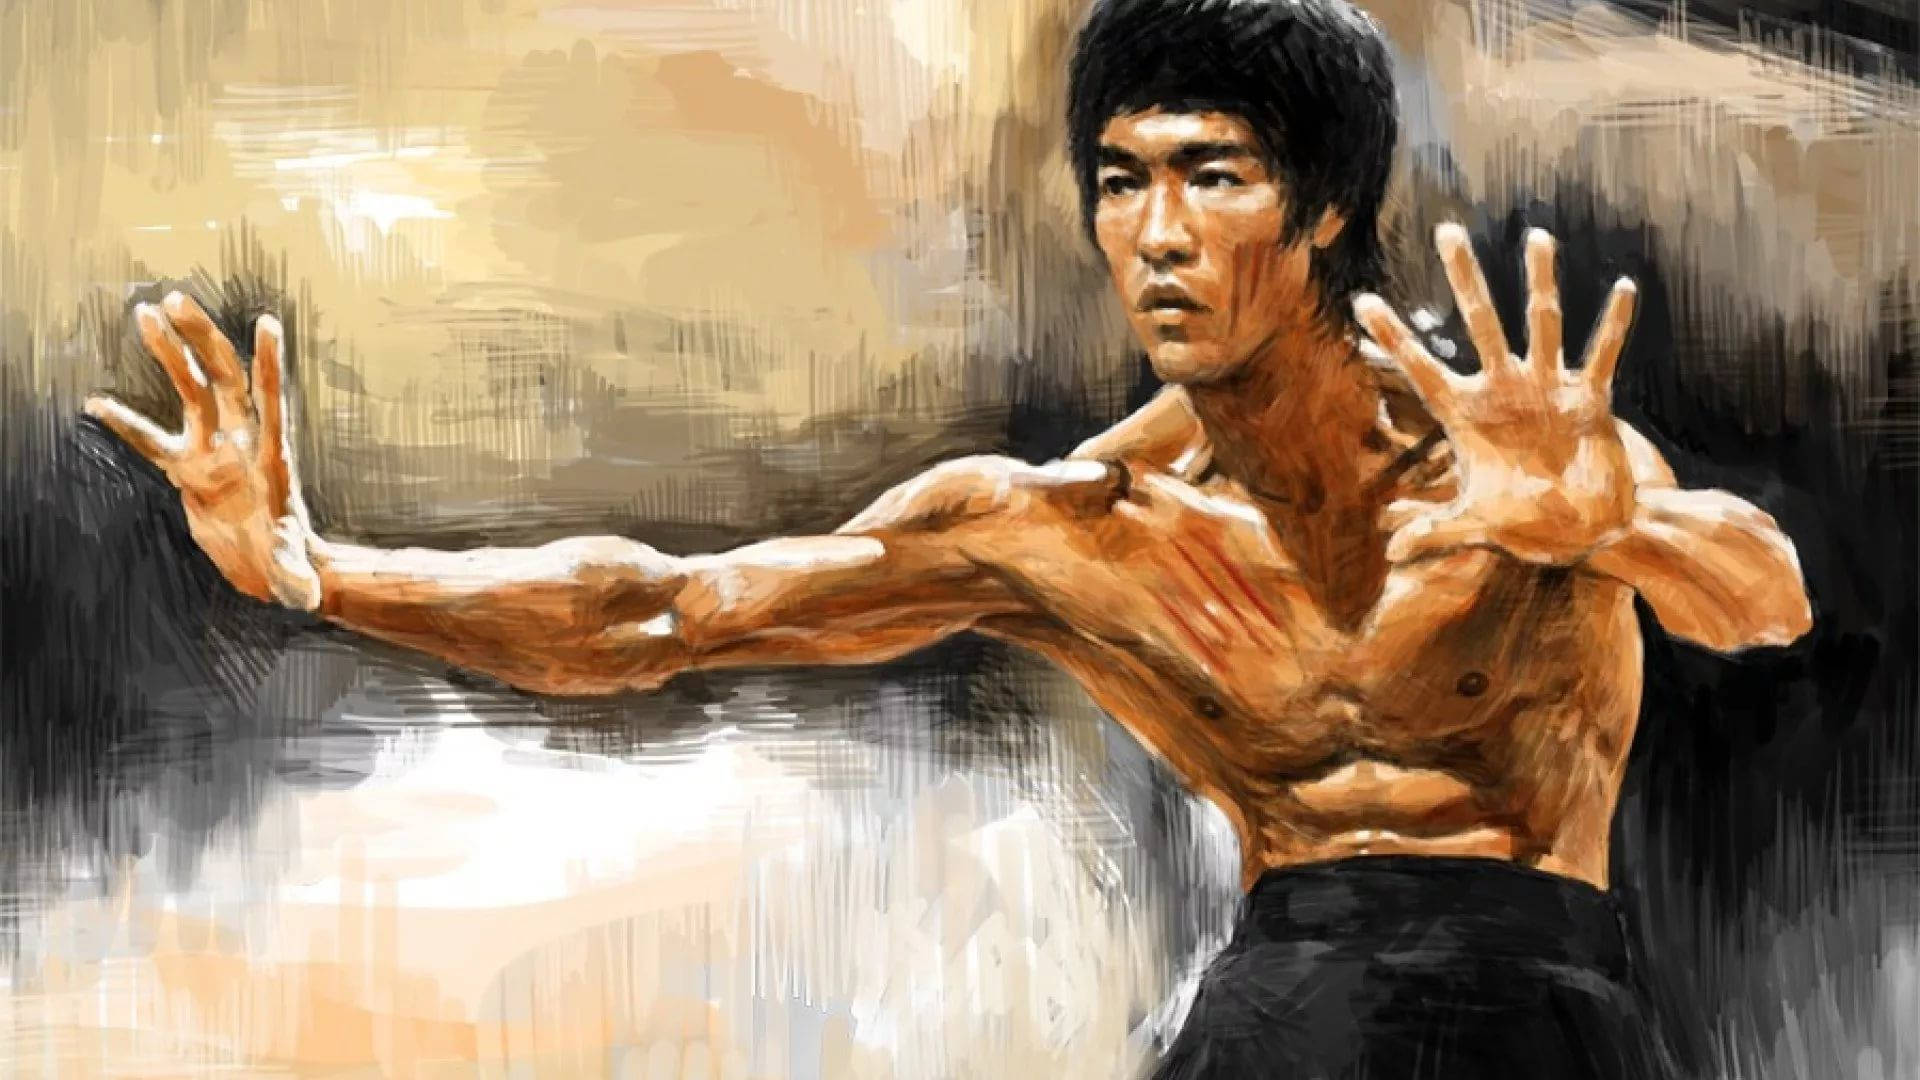 Free Bruce Lee Wallpaper Downloads, [100+] Bruce Lee Wallpapers for FREE |  